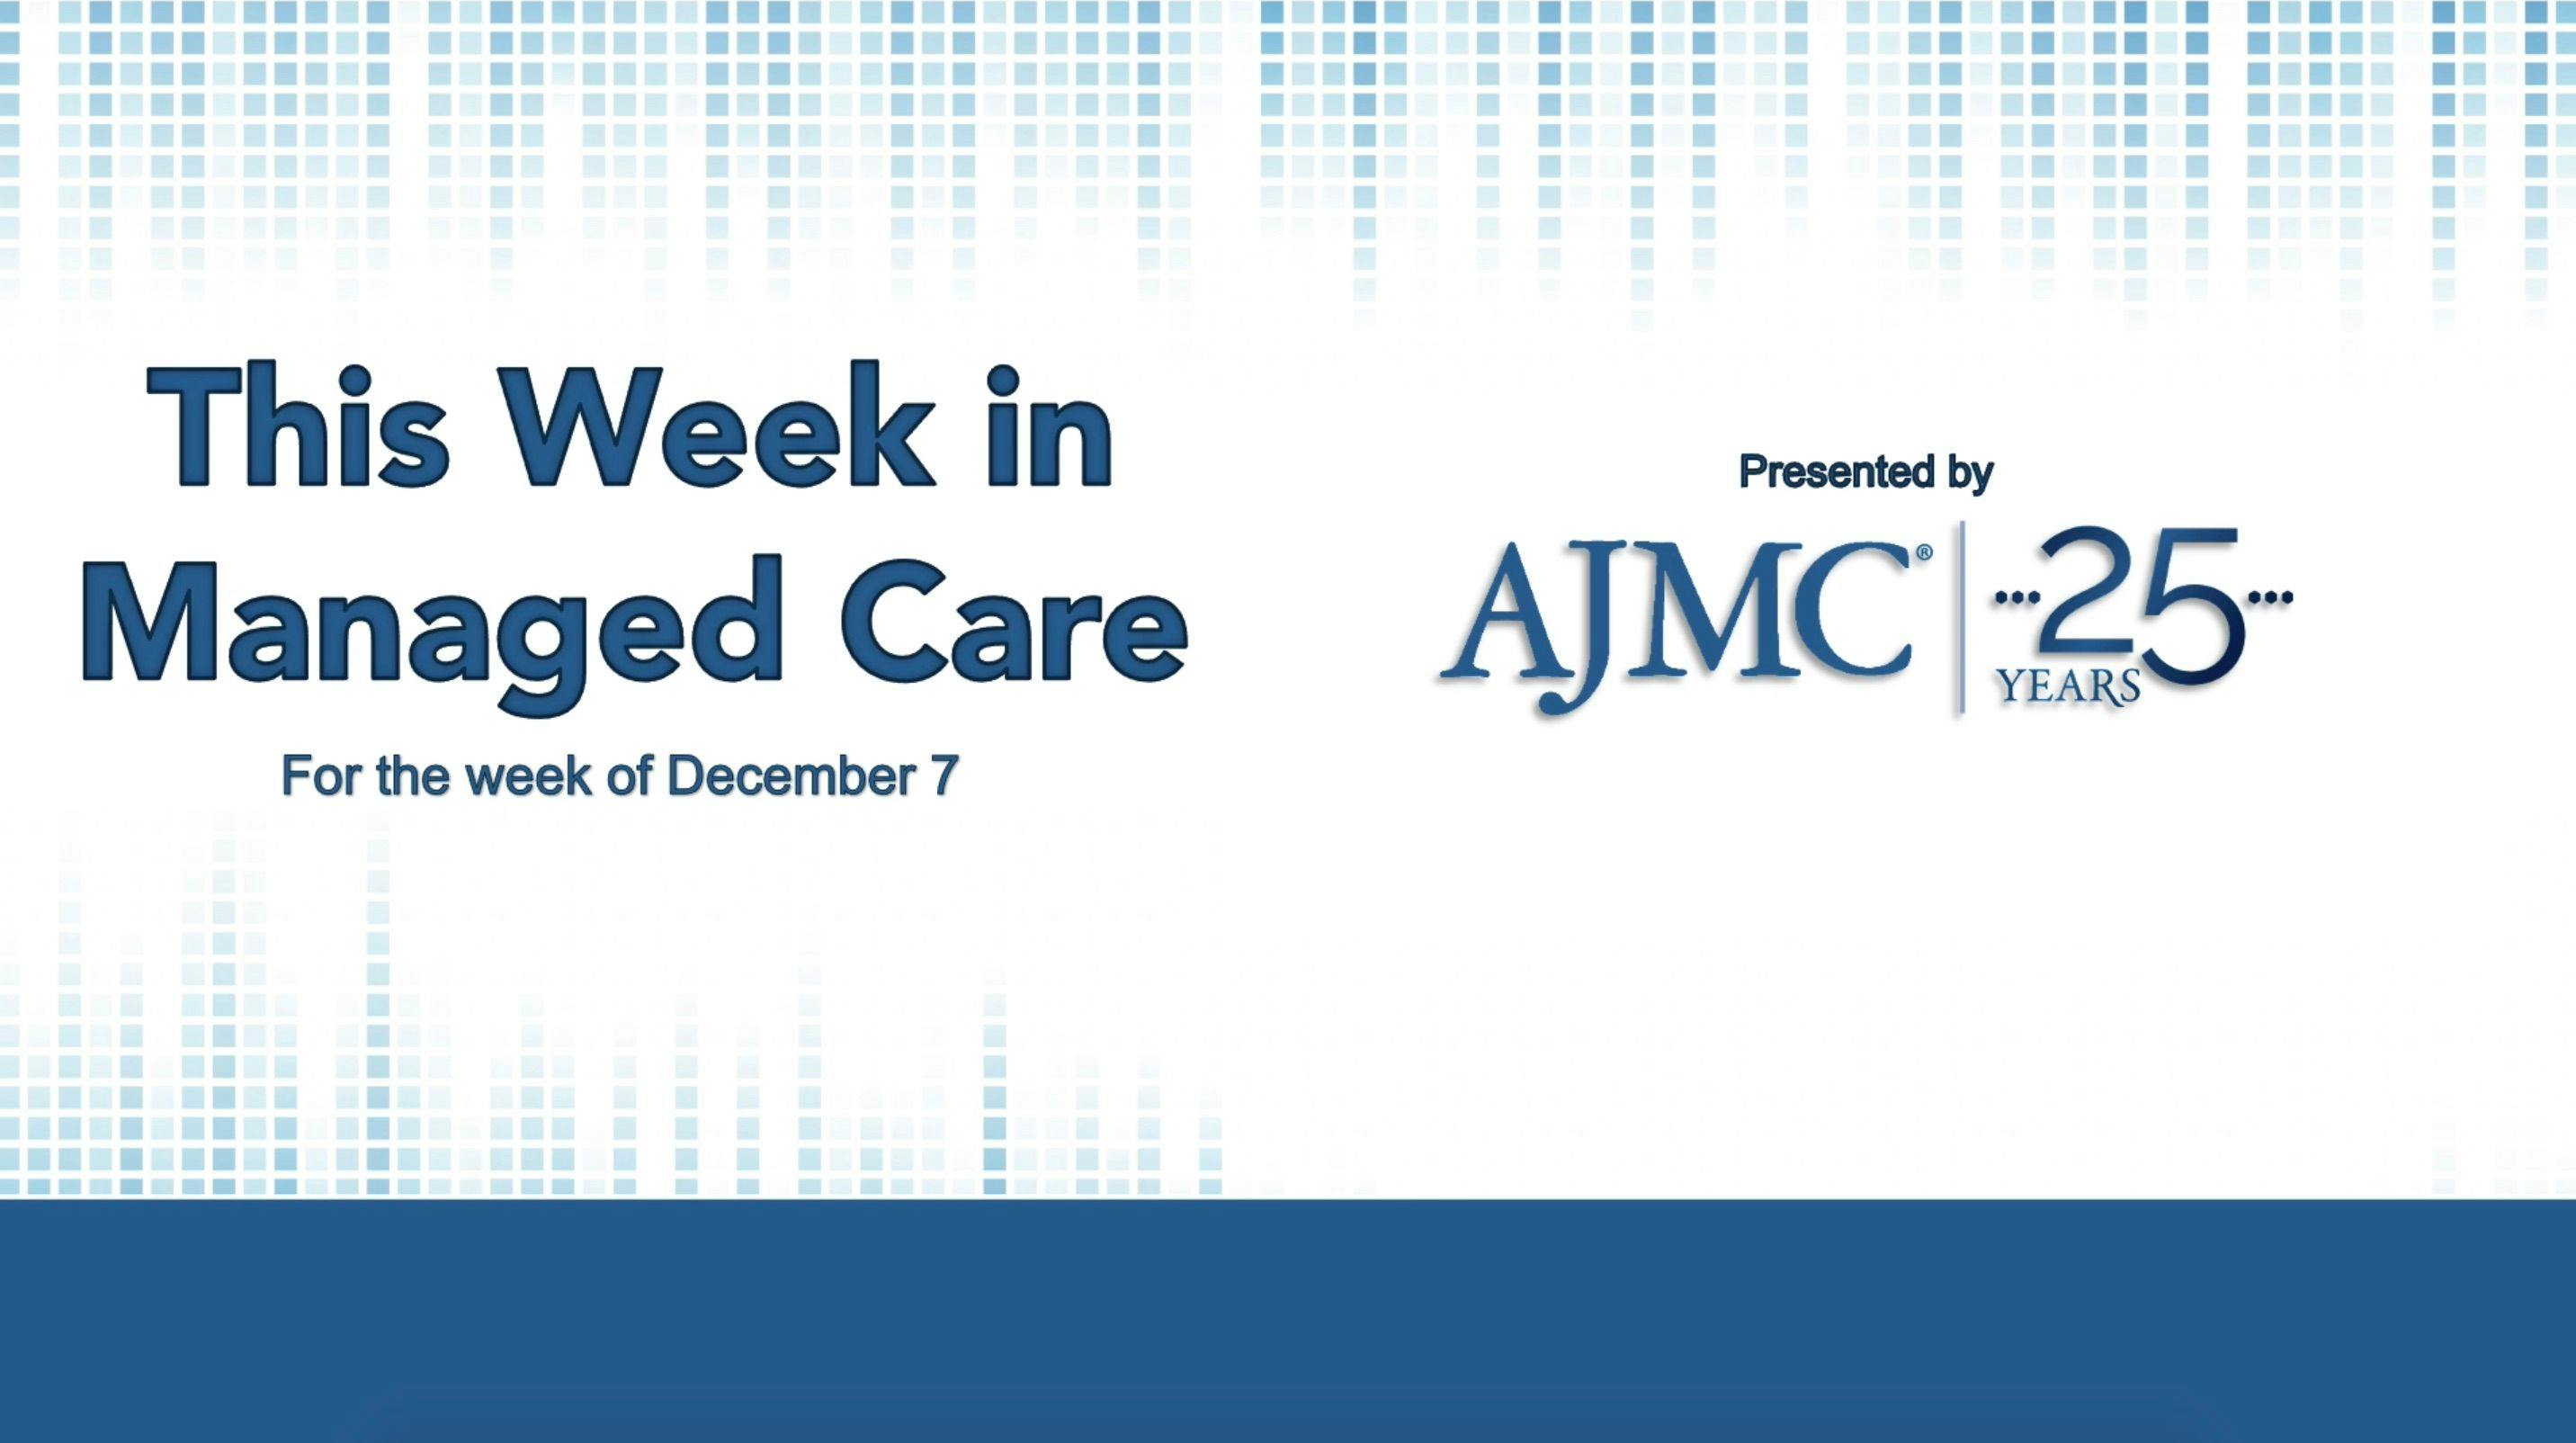 This Week in Managed Care: December 11, 2020